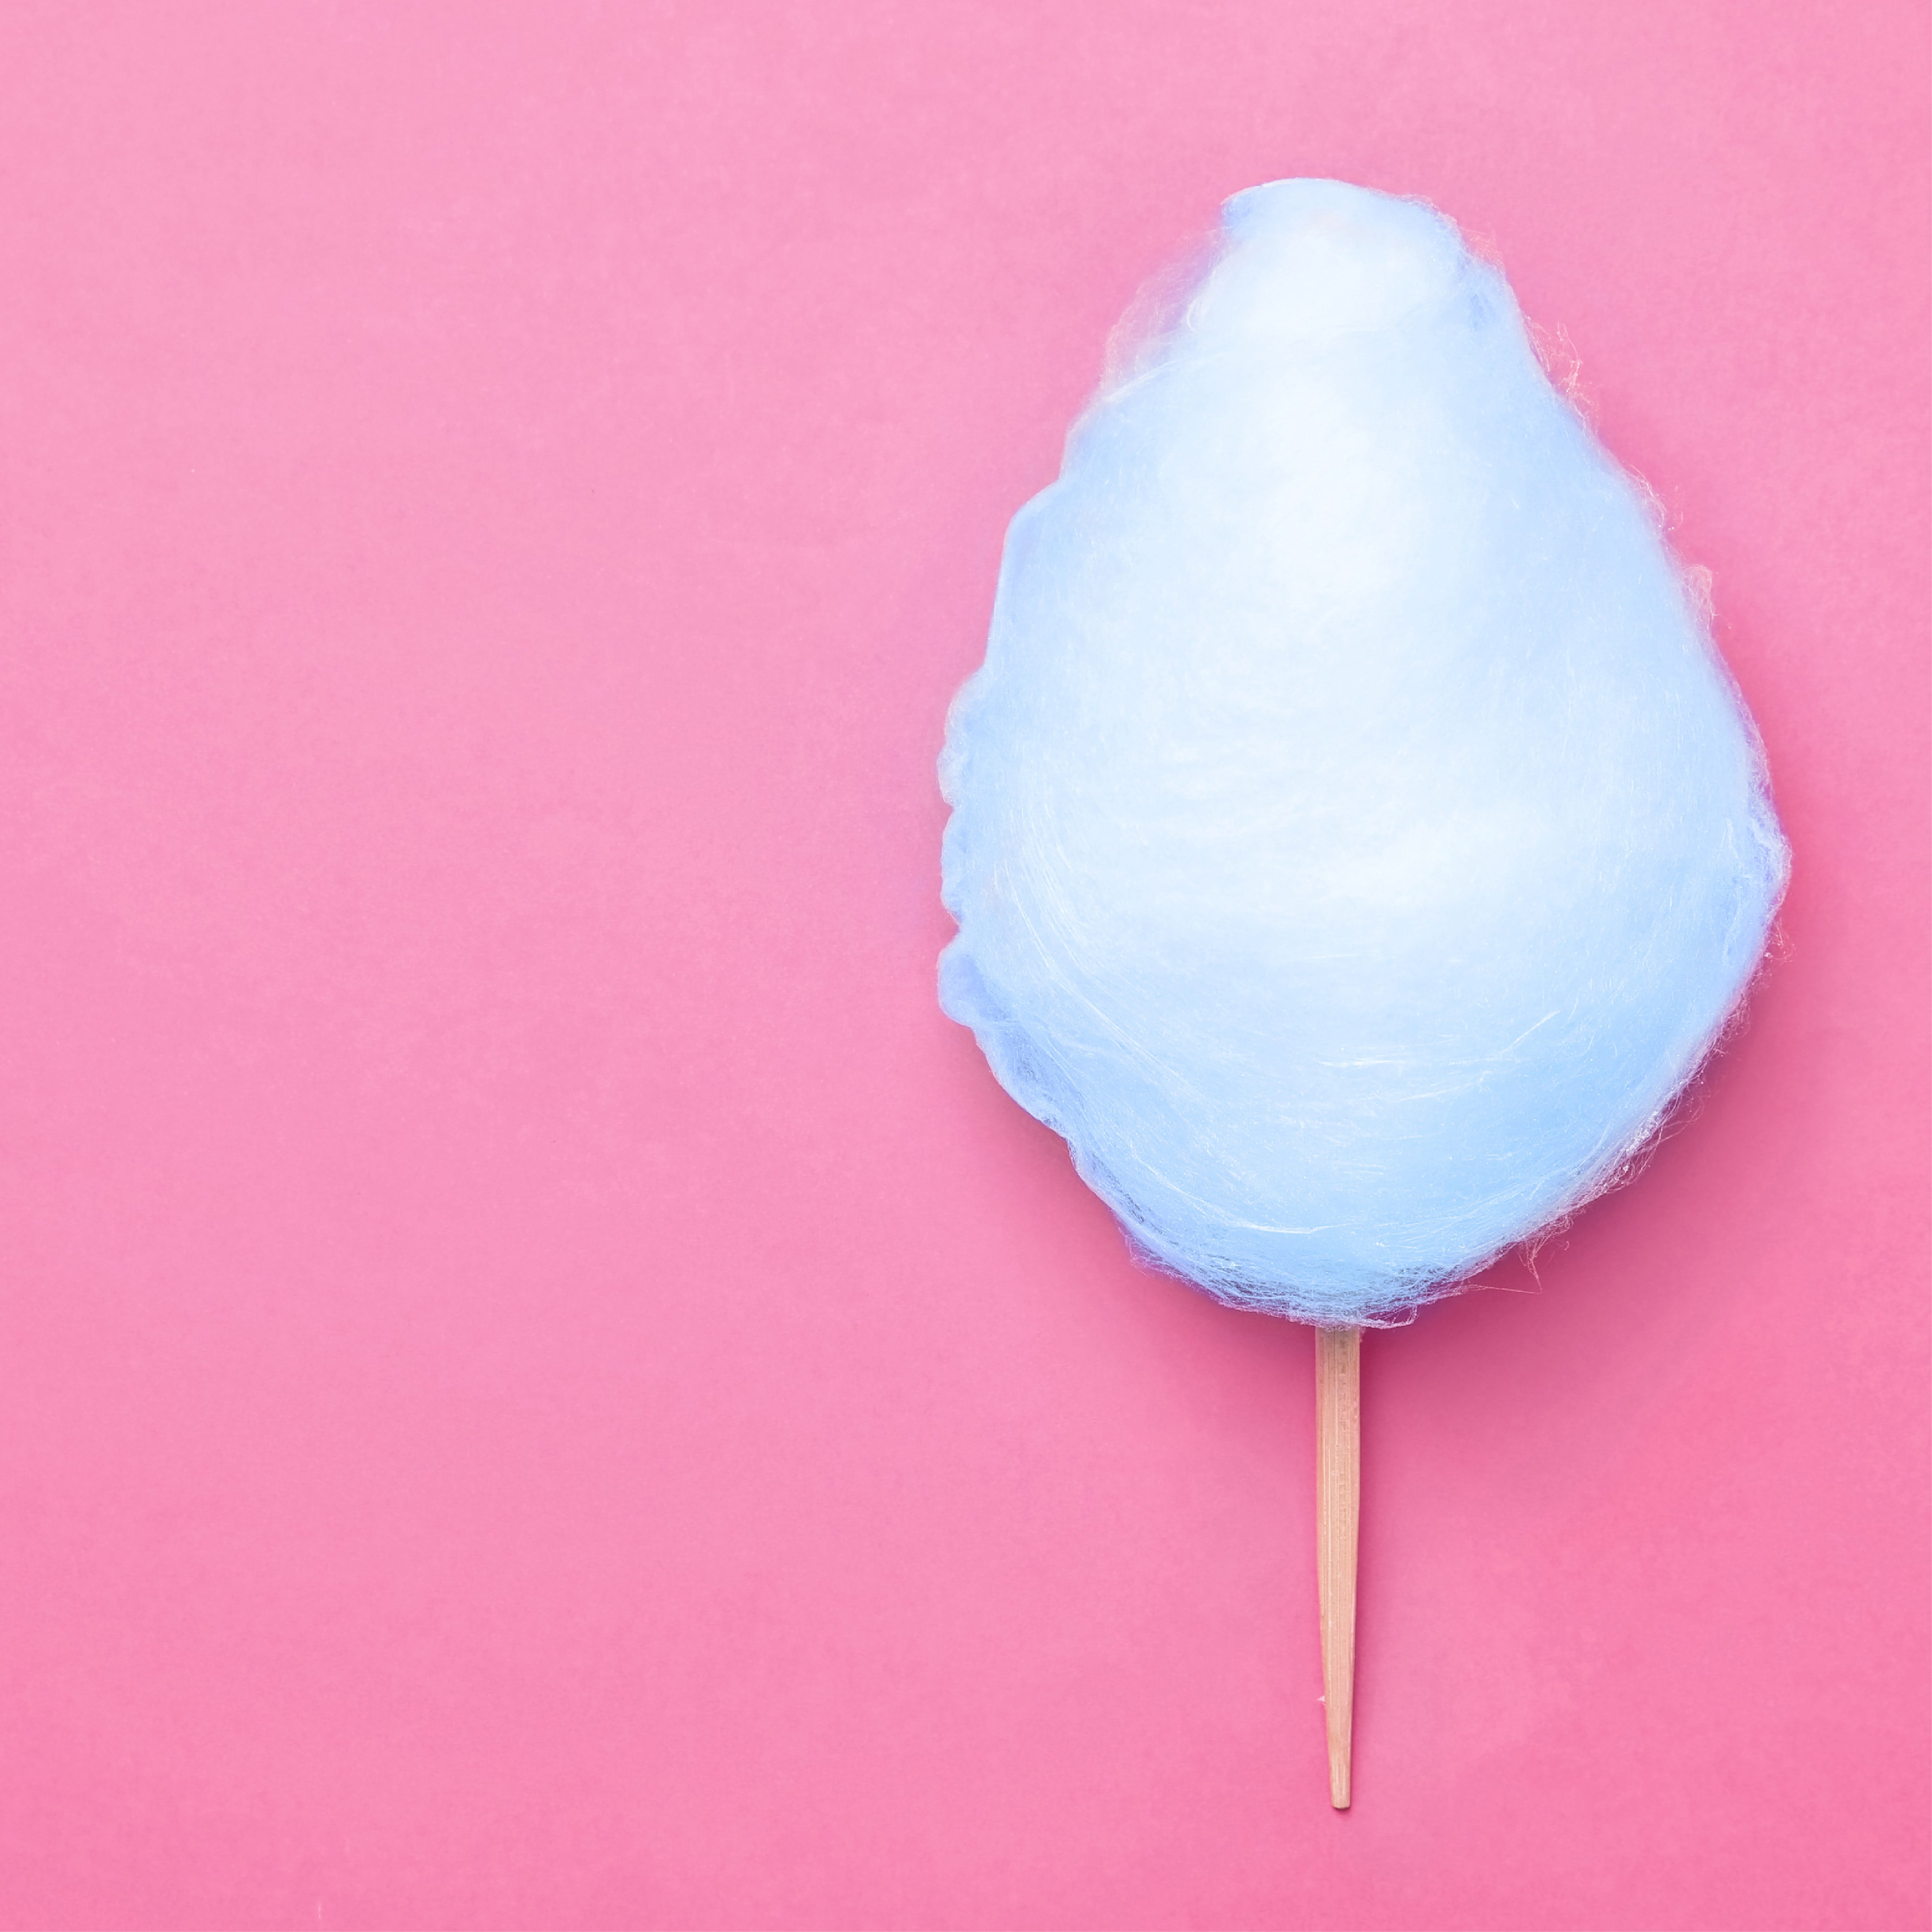 NO. 11 Fragrance Oil for Cold Air Diffusers - Blue Cotton Candy